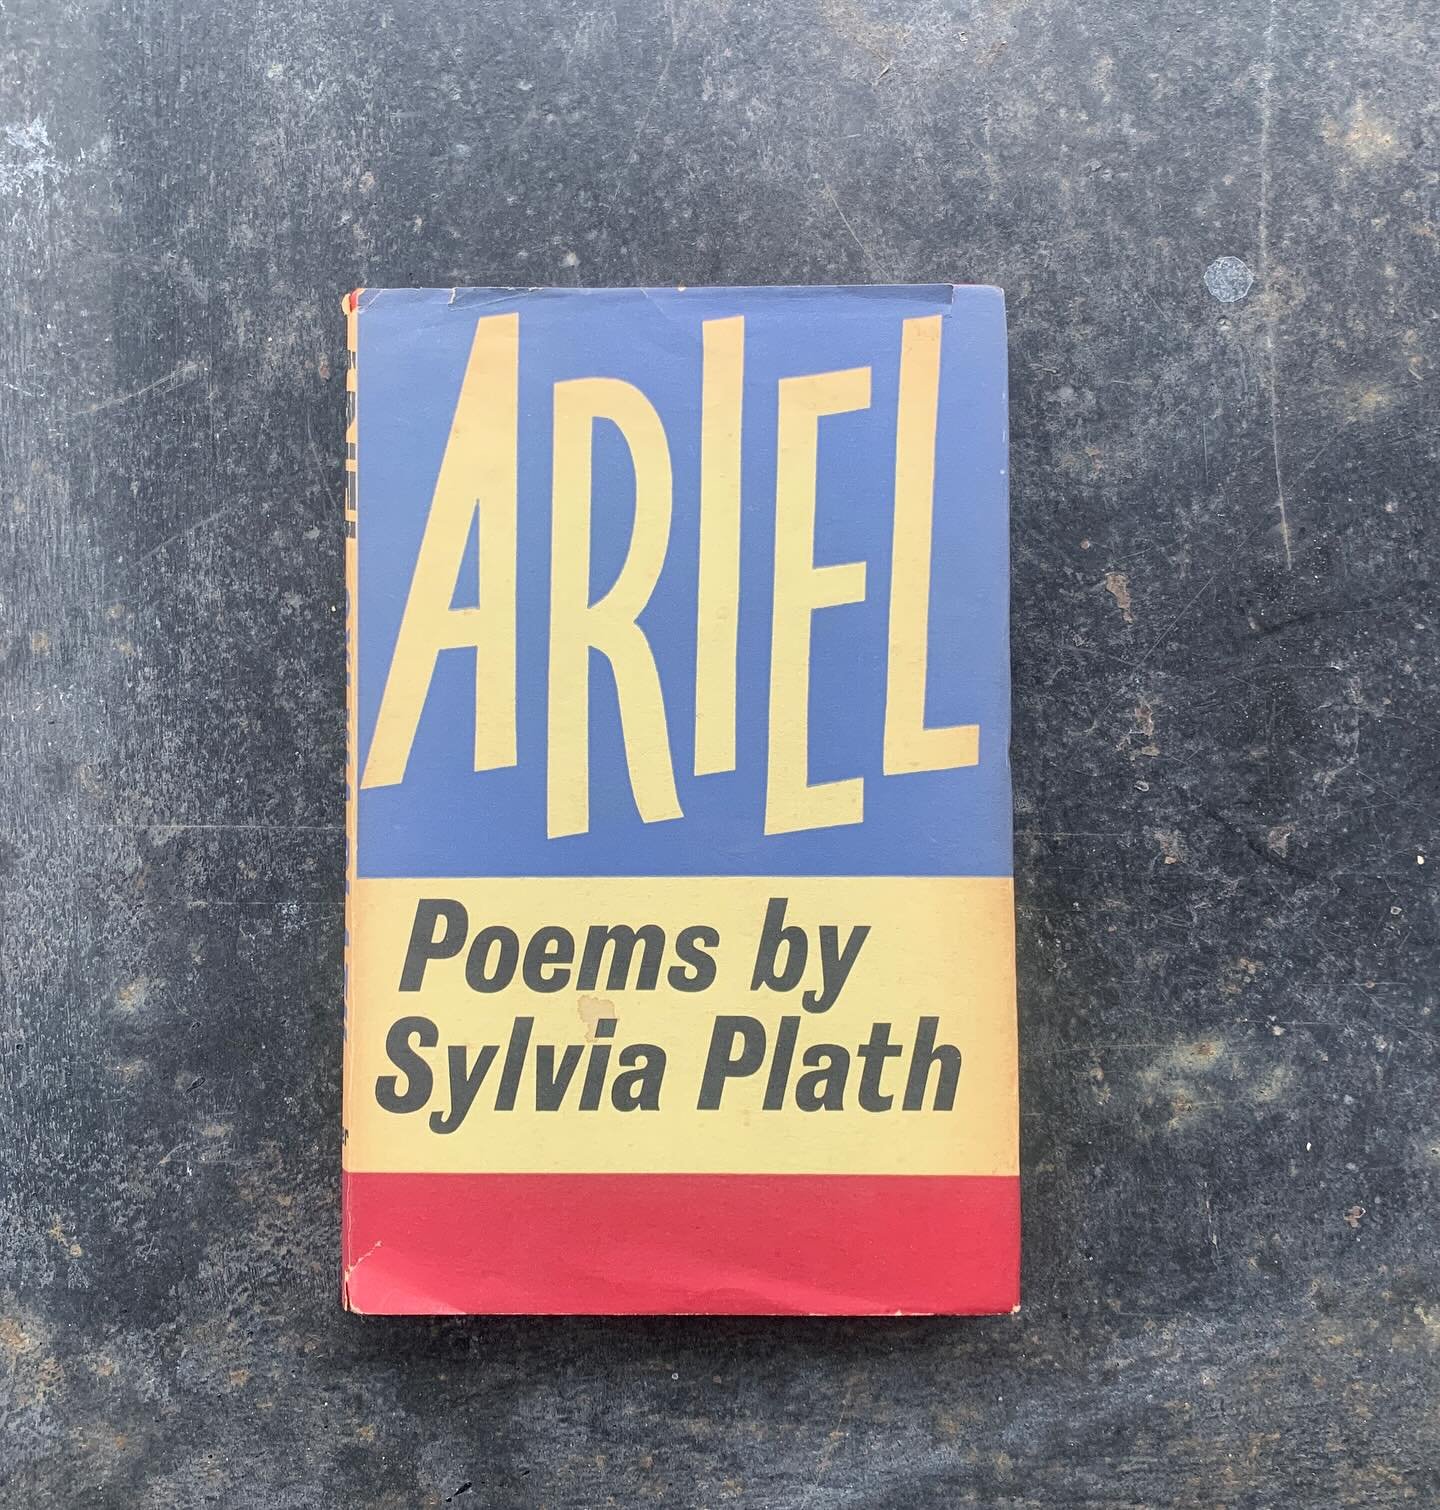 First edition of Ariel by Sylvia Plath. Iconic book by an iconic woman. One of the most important works of poetry of the twentieth century. Bit of a big deal.
#plath
#sylviaplath 
#poetry
#womenpoets 
#womenpoetry
#verse
#firstedition 
#rarebooks
#mo